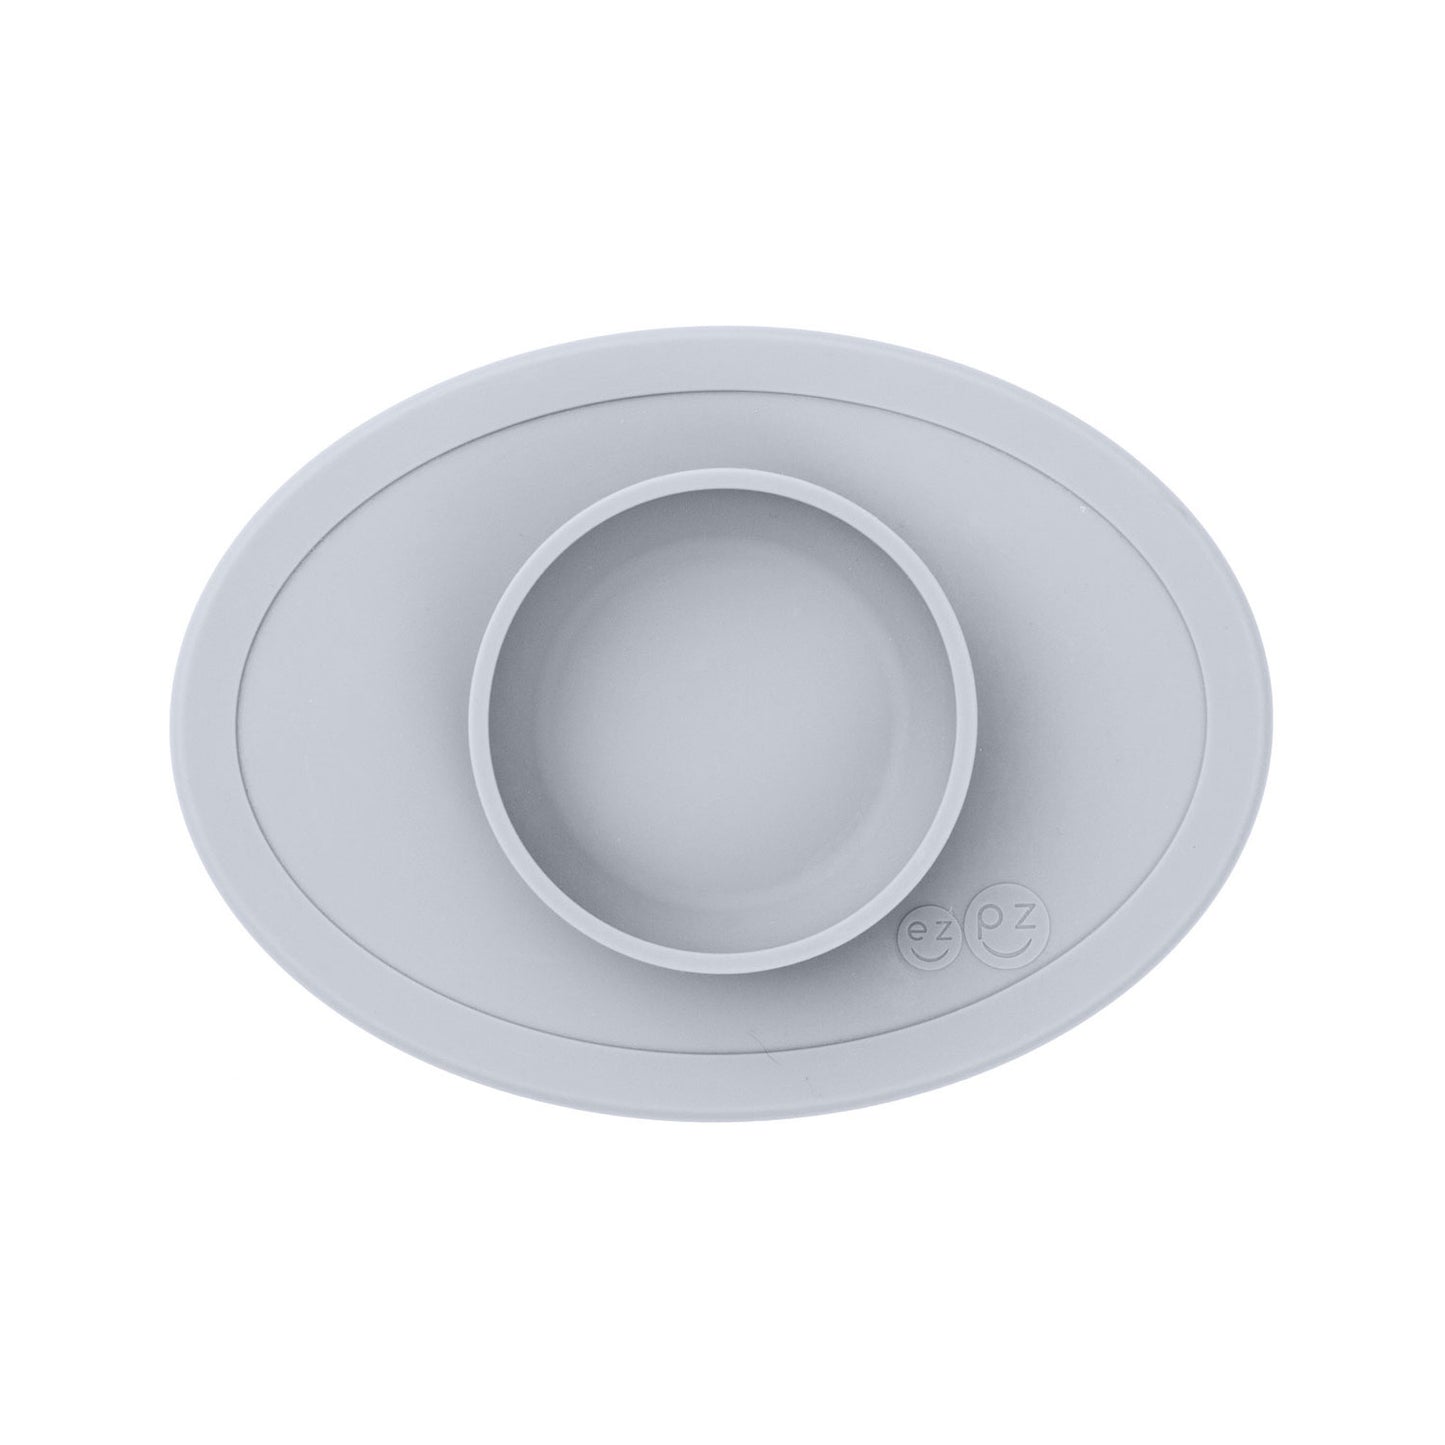 Ideal for first foods, The EzPz Tiny Bowl is 100% Silicone all-in-one placemat + bowl that suctions to smooth surfaces.